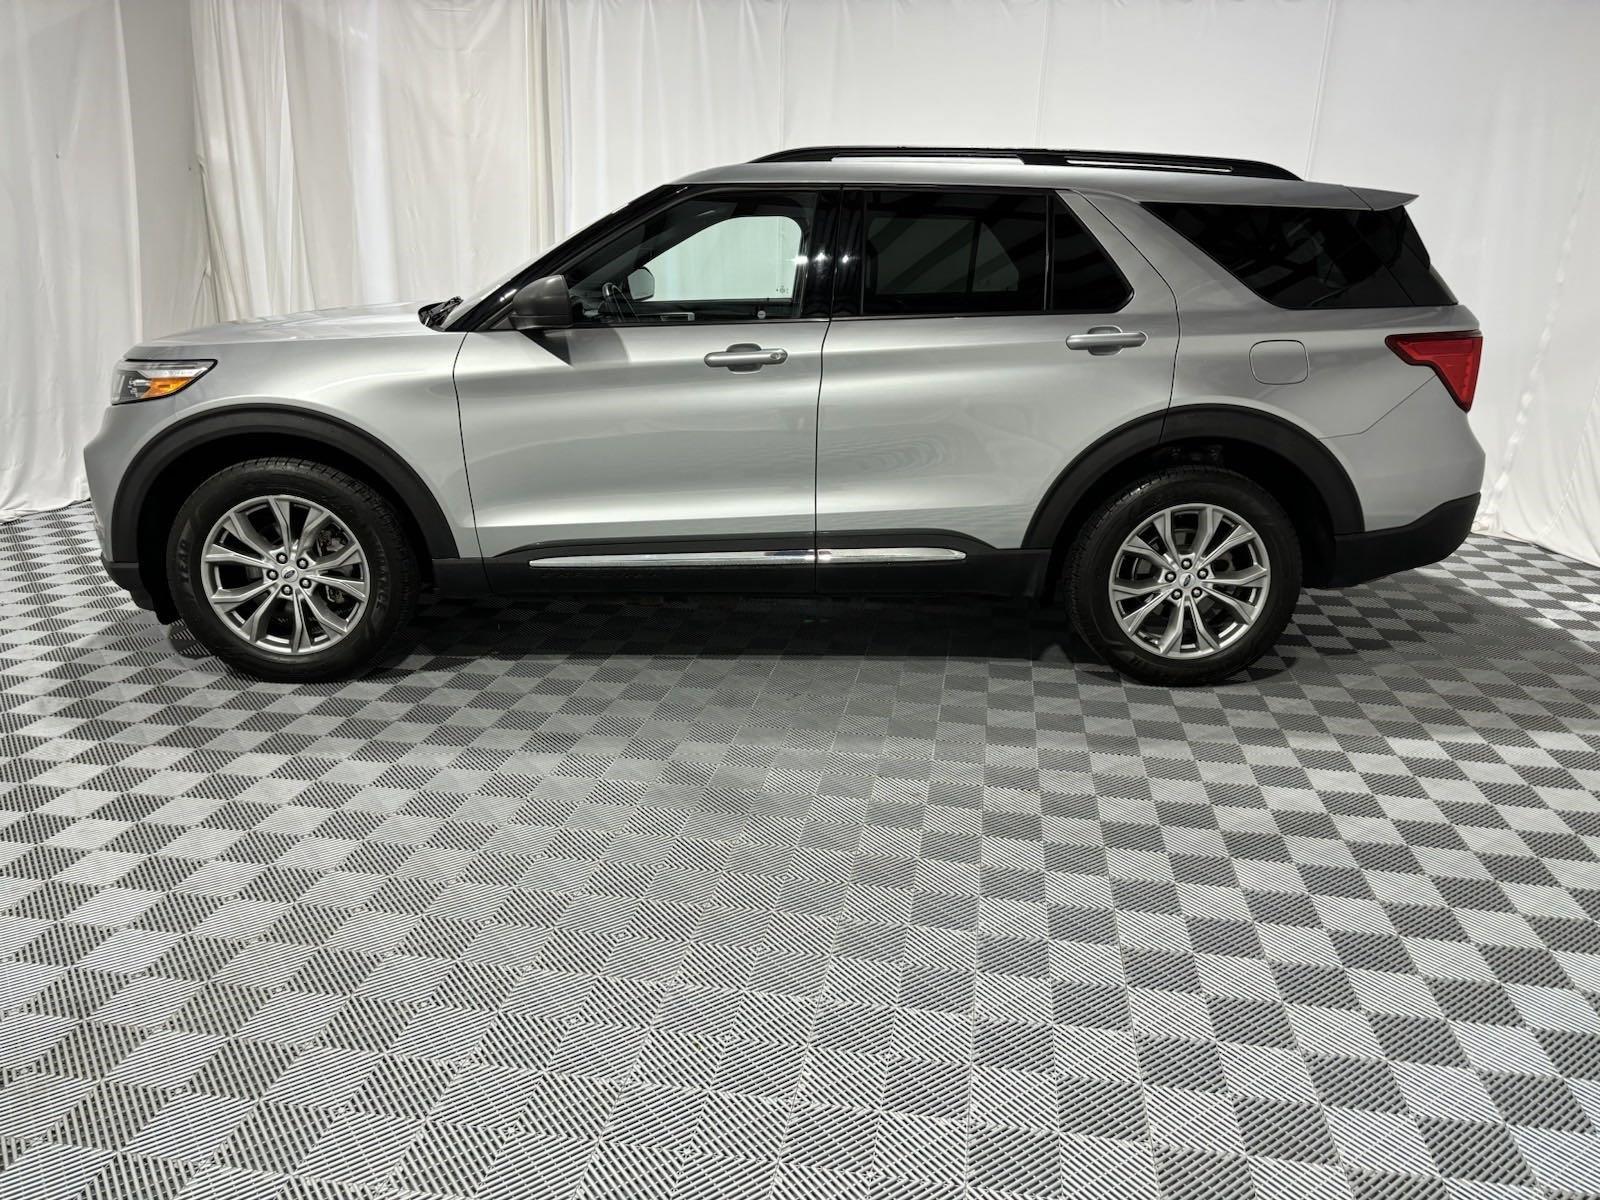 Used 2020 Ford Explorer XLT Sport Utility for sale in St Joseph MO